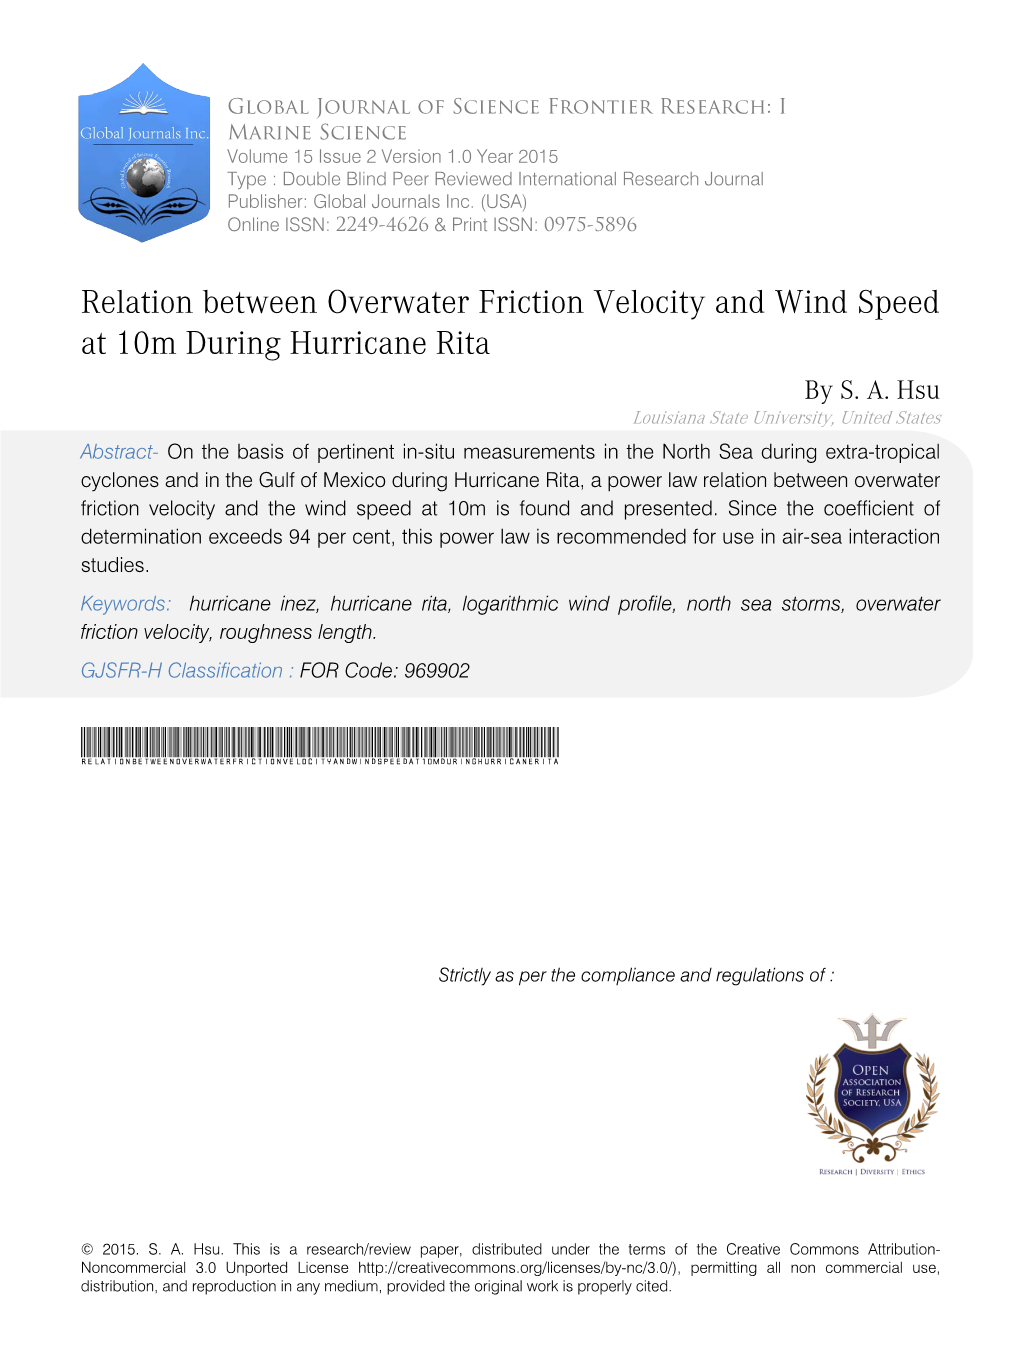 Relation Between Overwater Friction Velocity and Wind Speed at 10M During Hurricane Rita by S